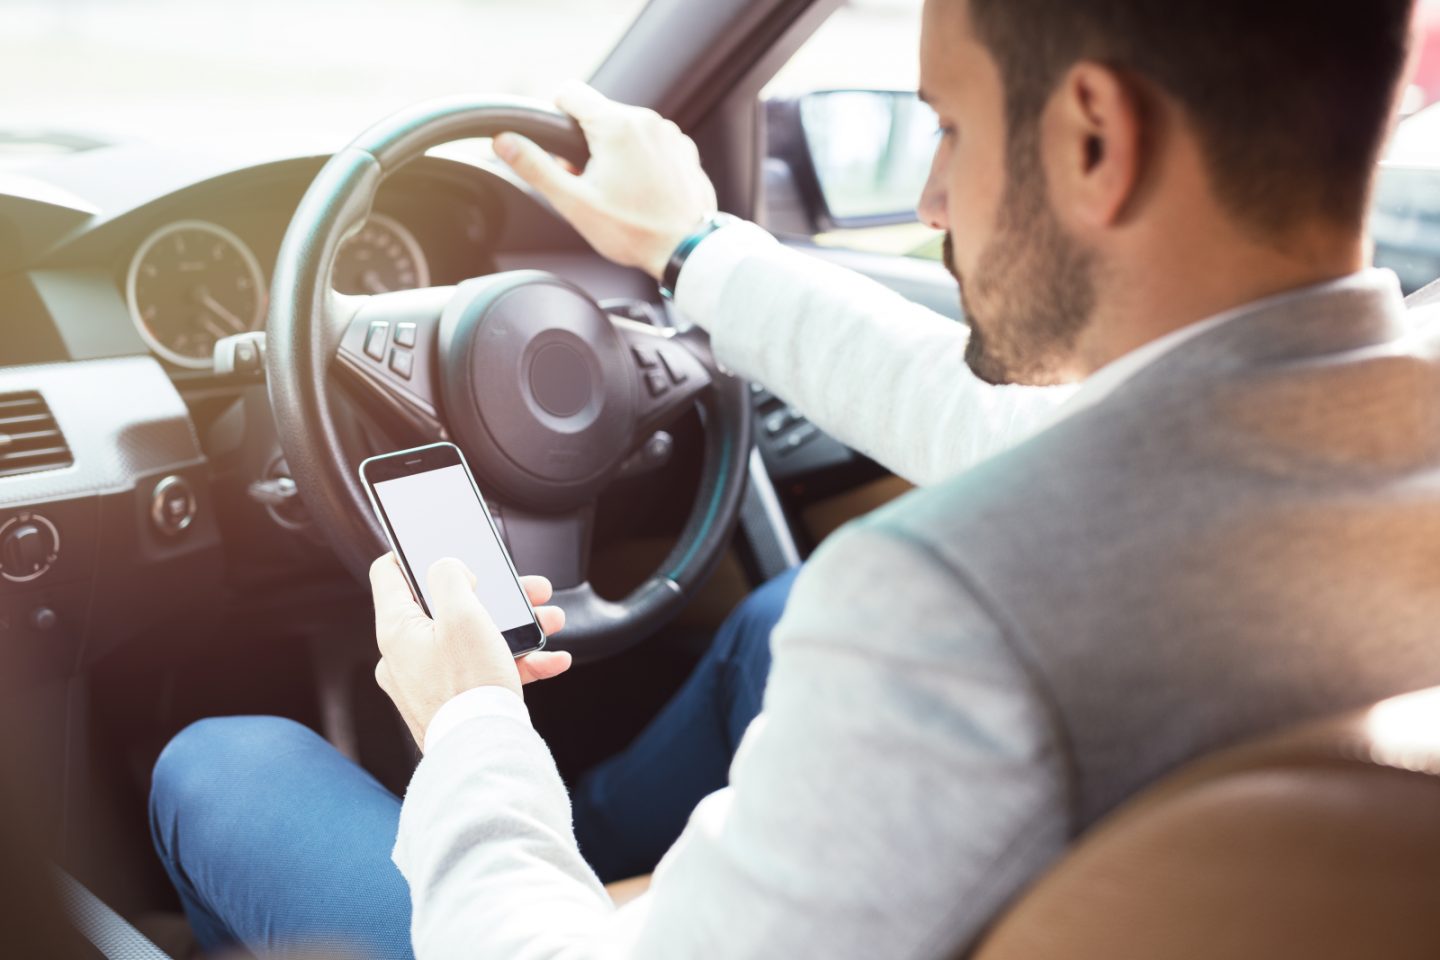 should drivers of automobiles be prohibited from using cellular phones